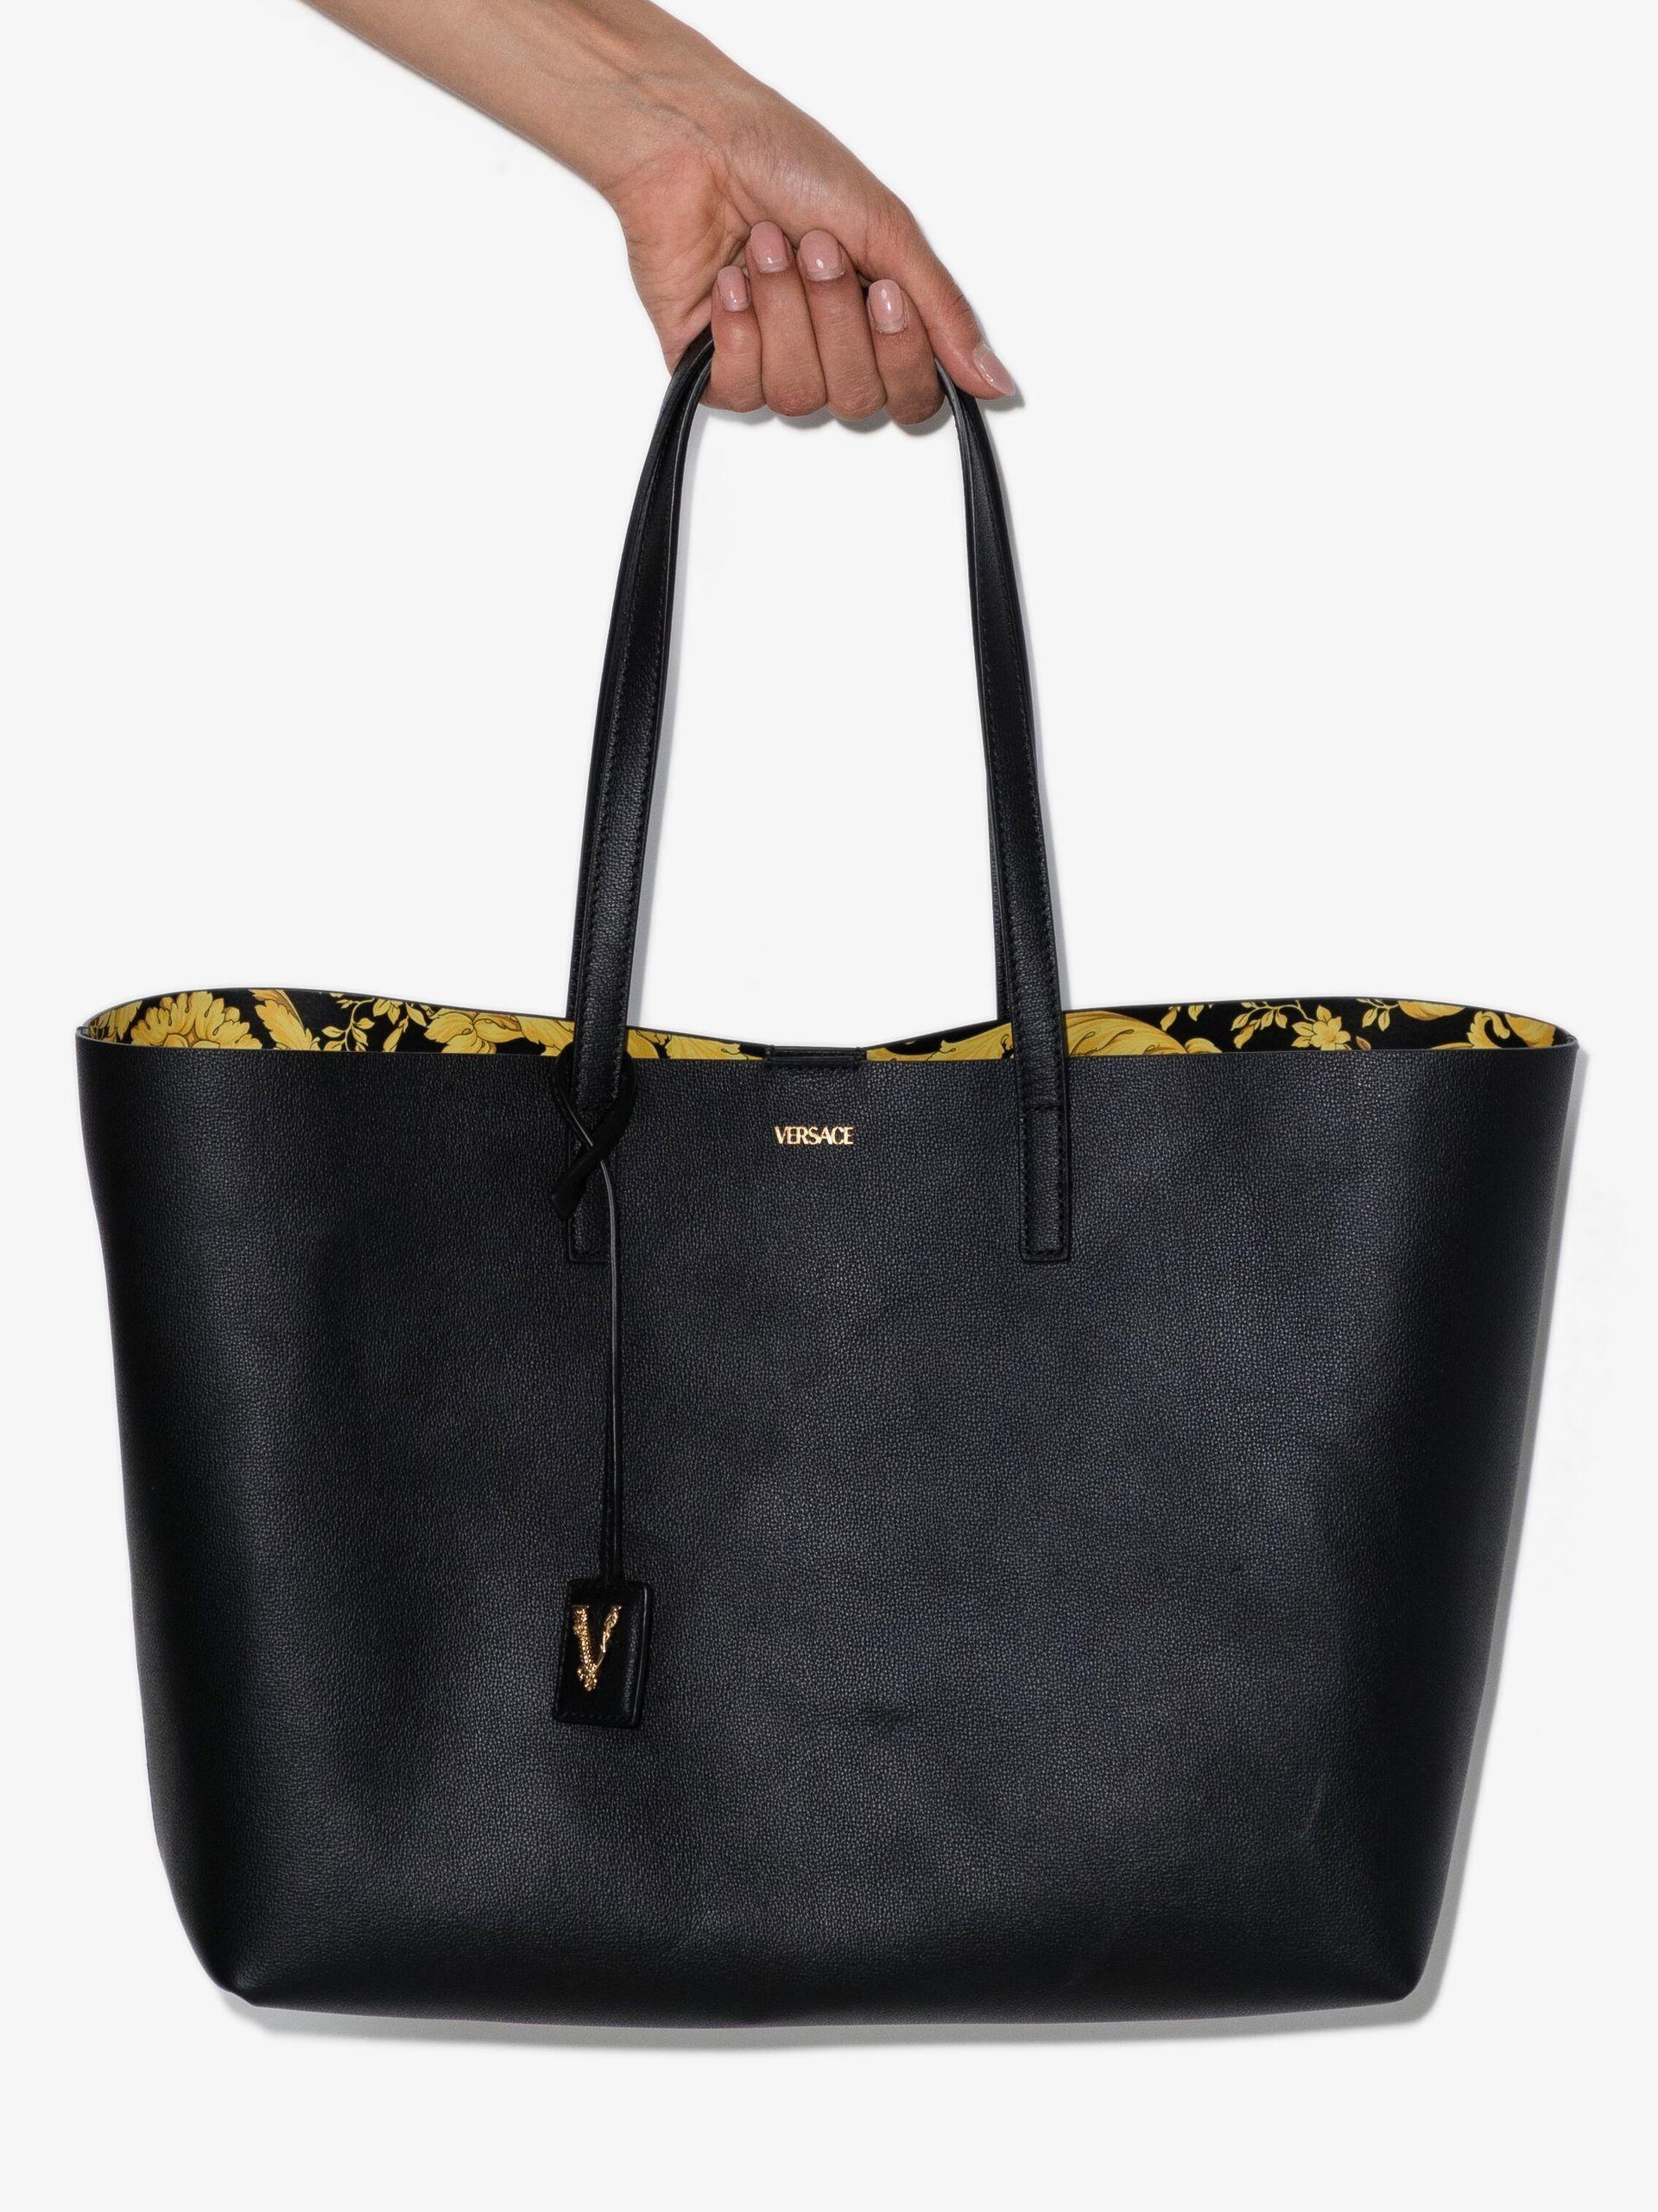 Versace Leather Tote Bag in Black | Lyst